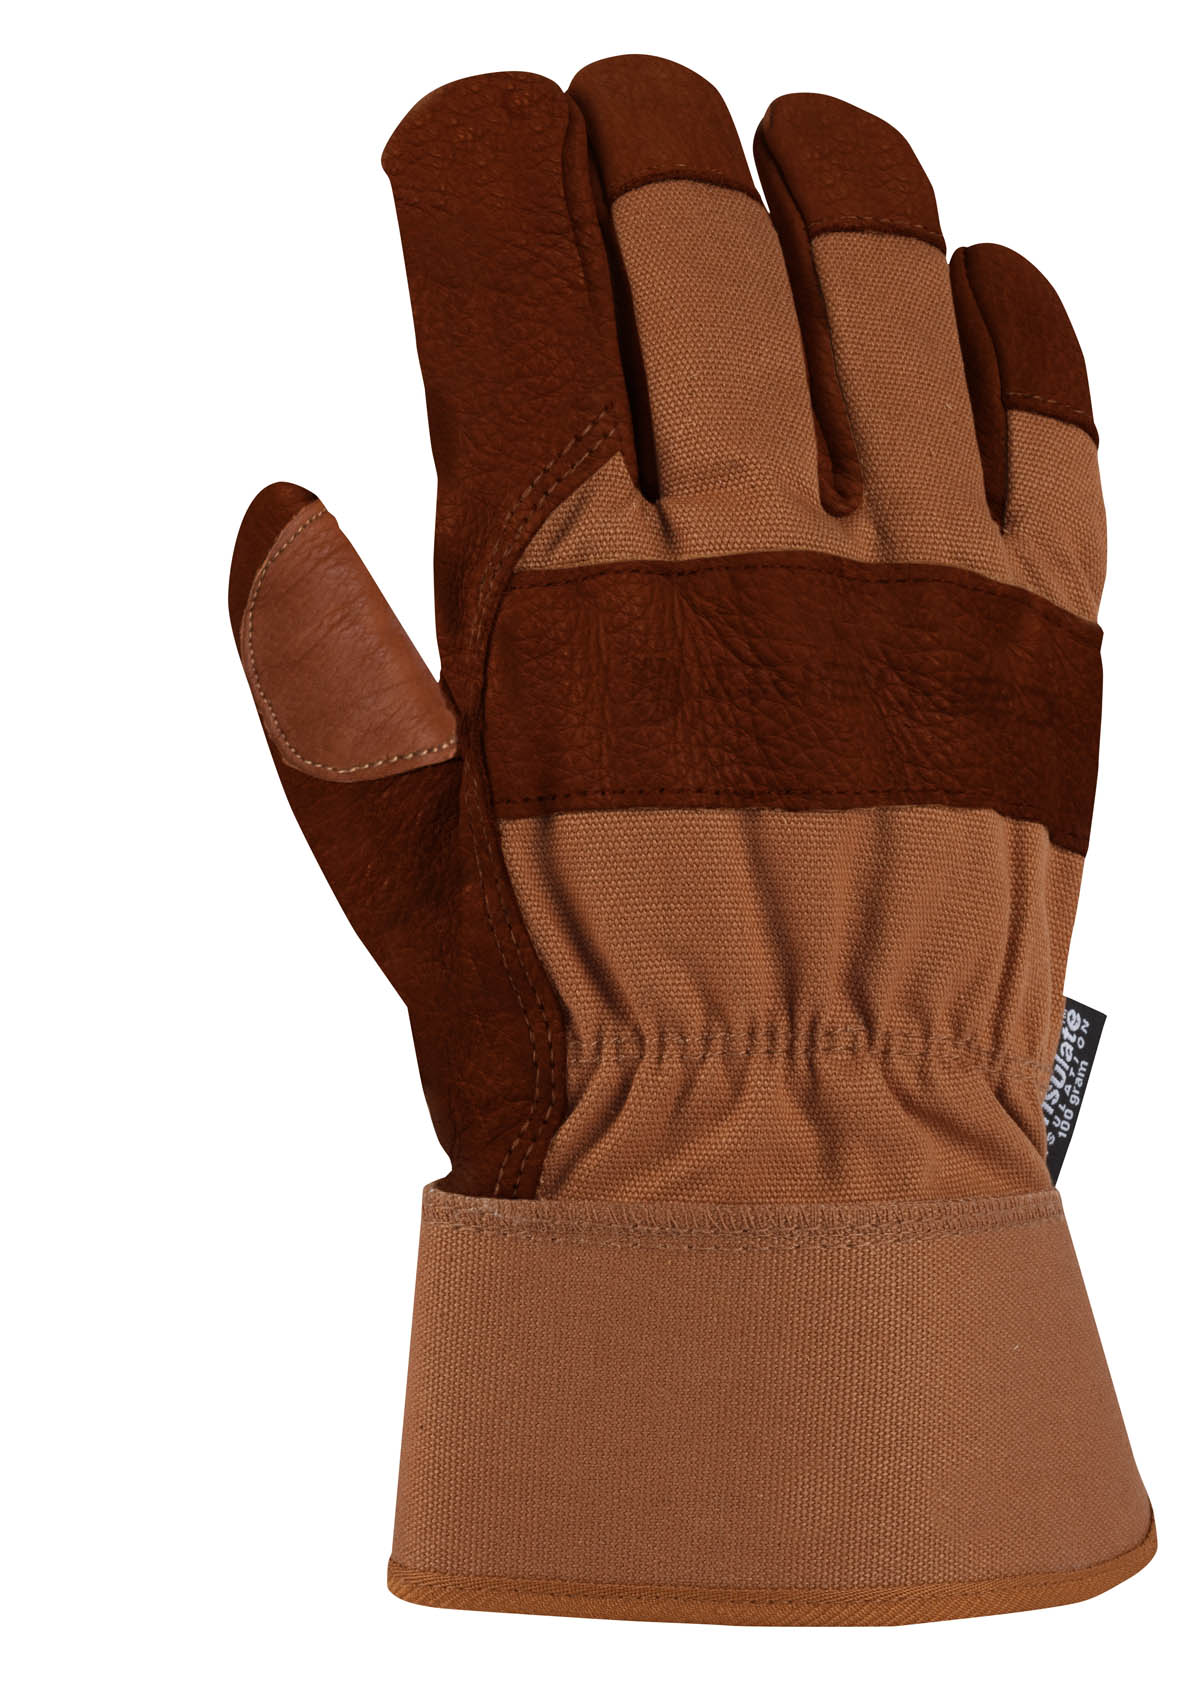 Carhartt Men's Insulated Bison Leather